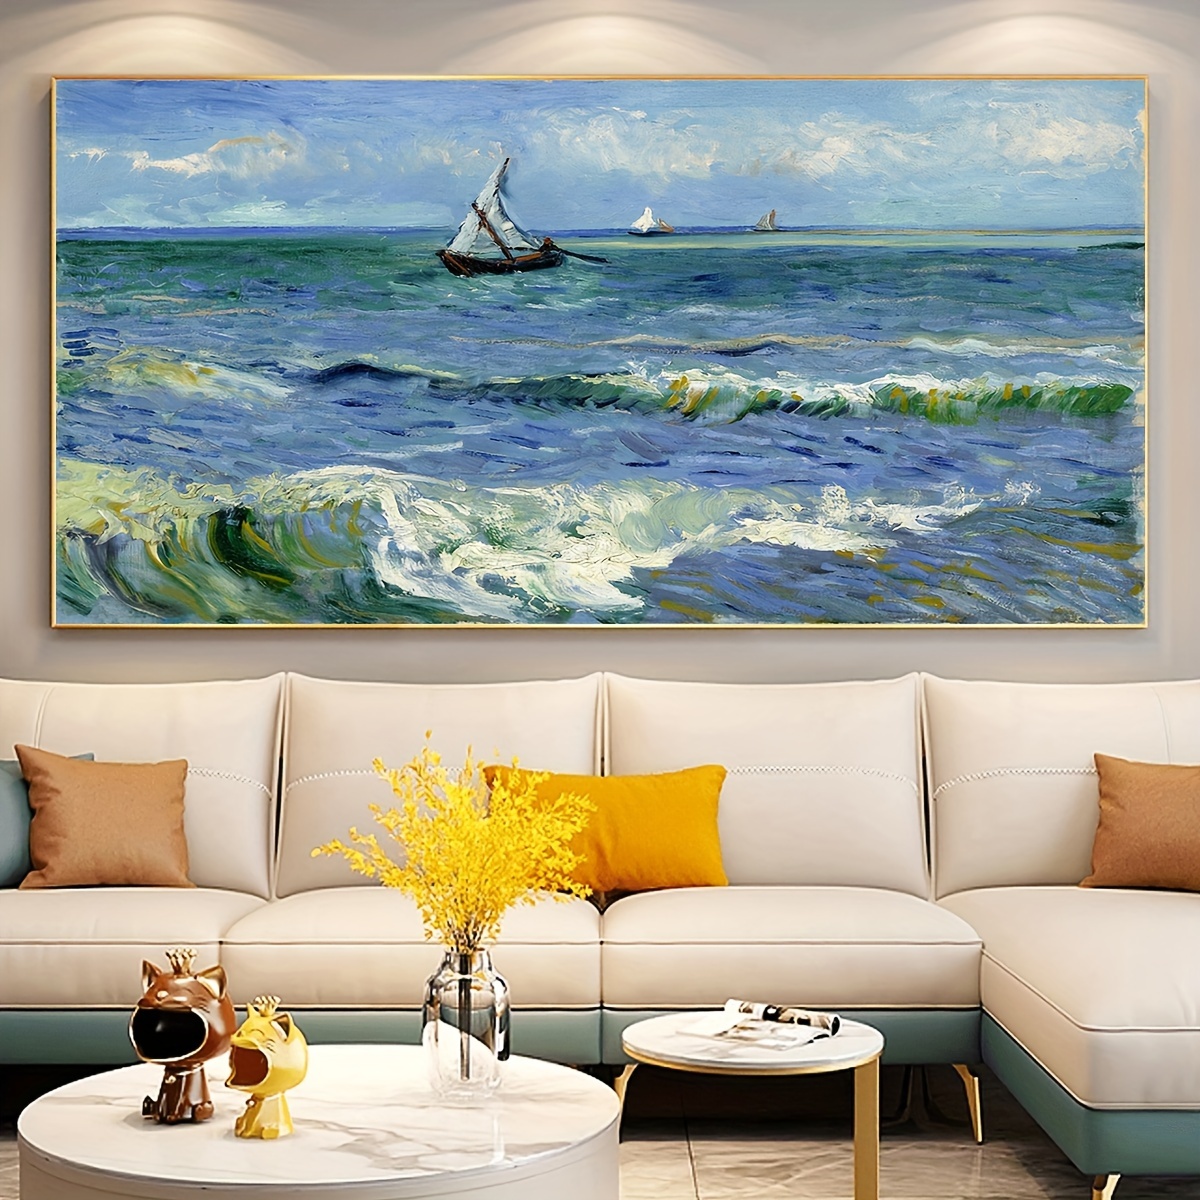 

1pc Unframed Canvas Poster, Modern Art, Ship Sailing On Sea Wall Art, Ideal Gift For Bedroom Living Room Corridor, Wall Art, Wall Decor, Winter Decor, Room Decoration